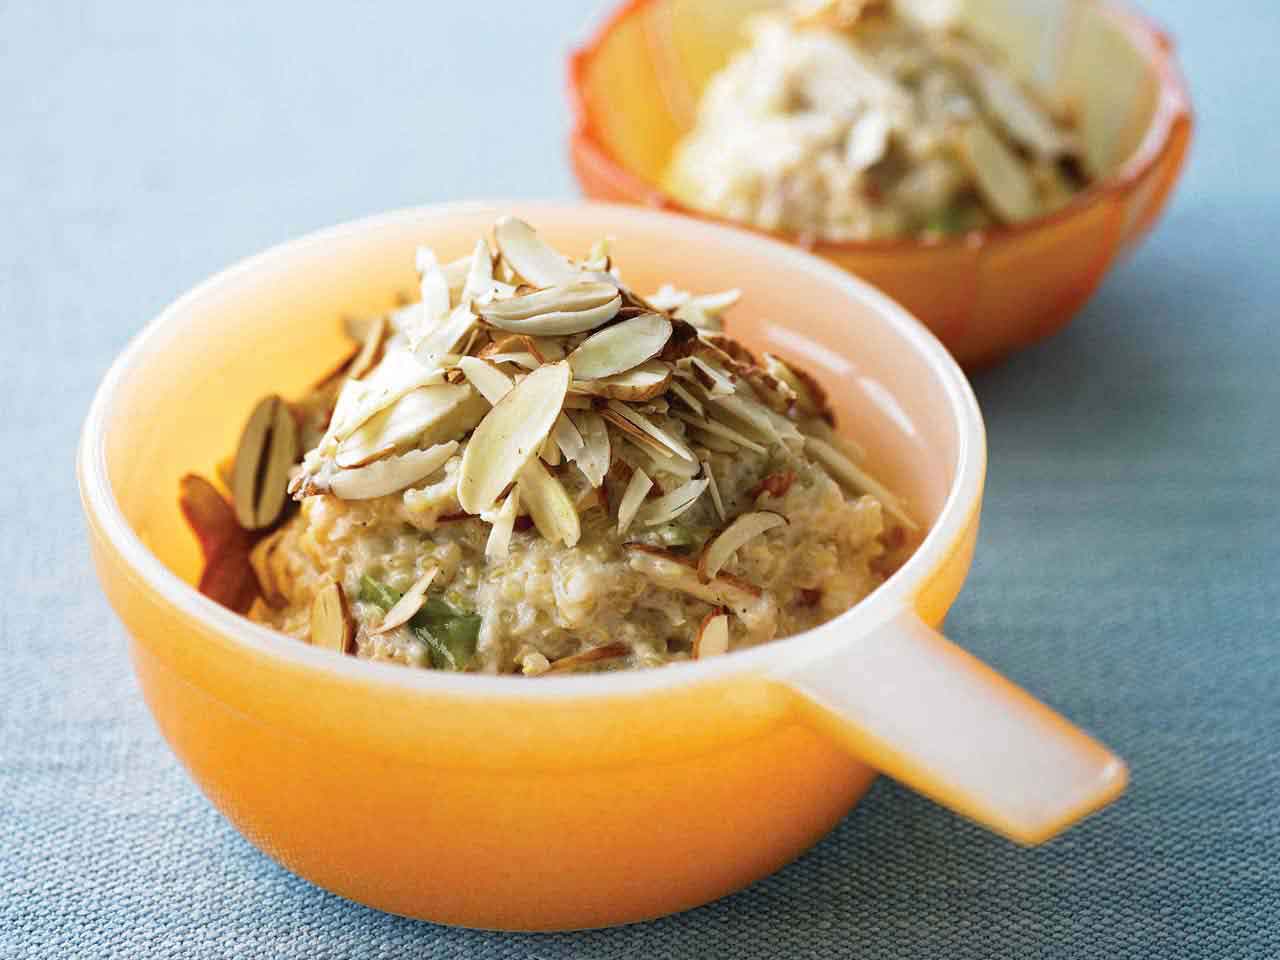 Chilled apple, pear and quinoa porridge with raw almonds